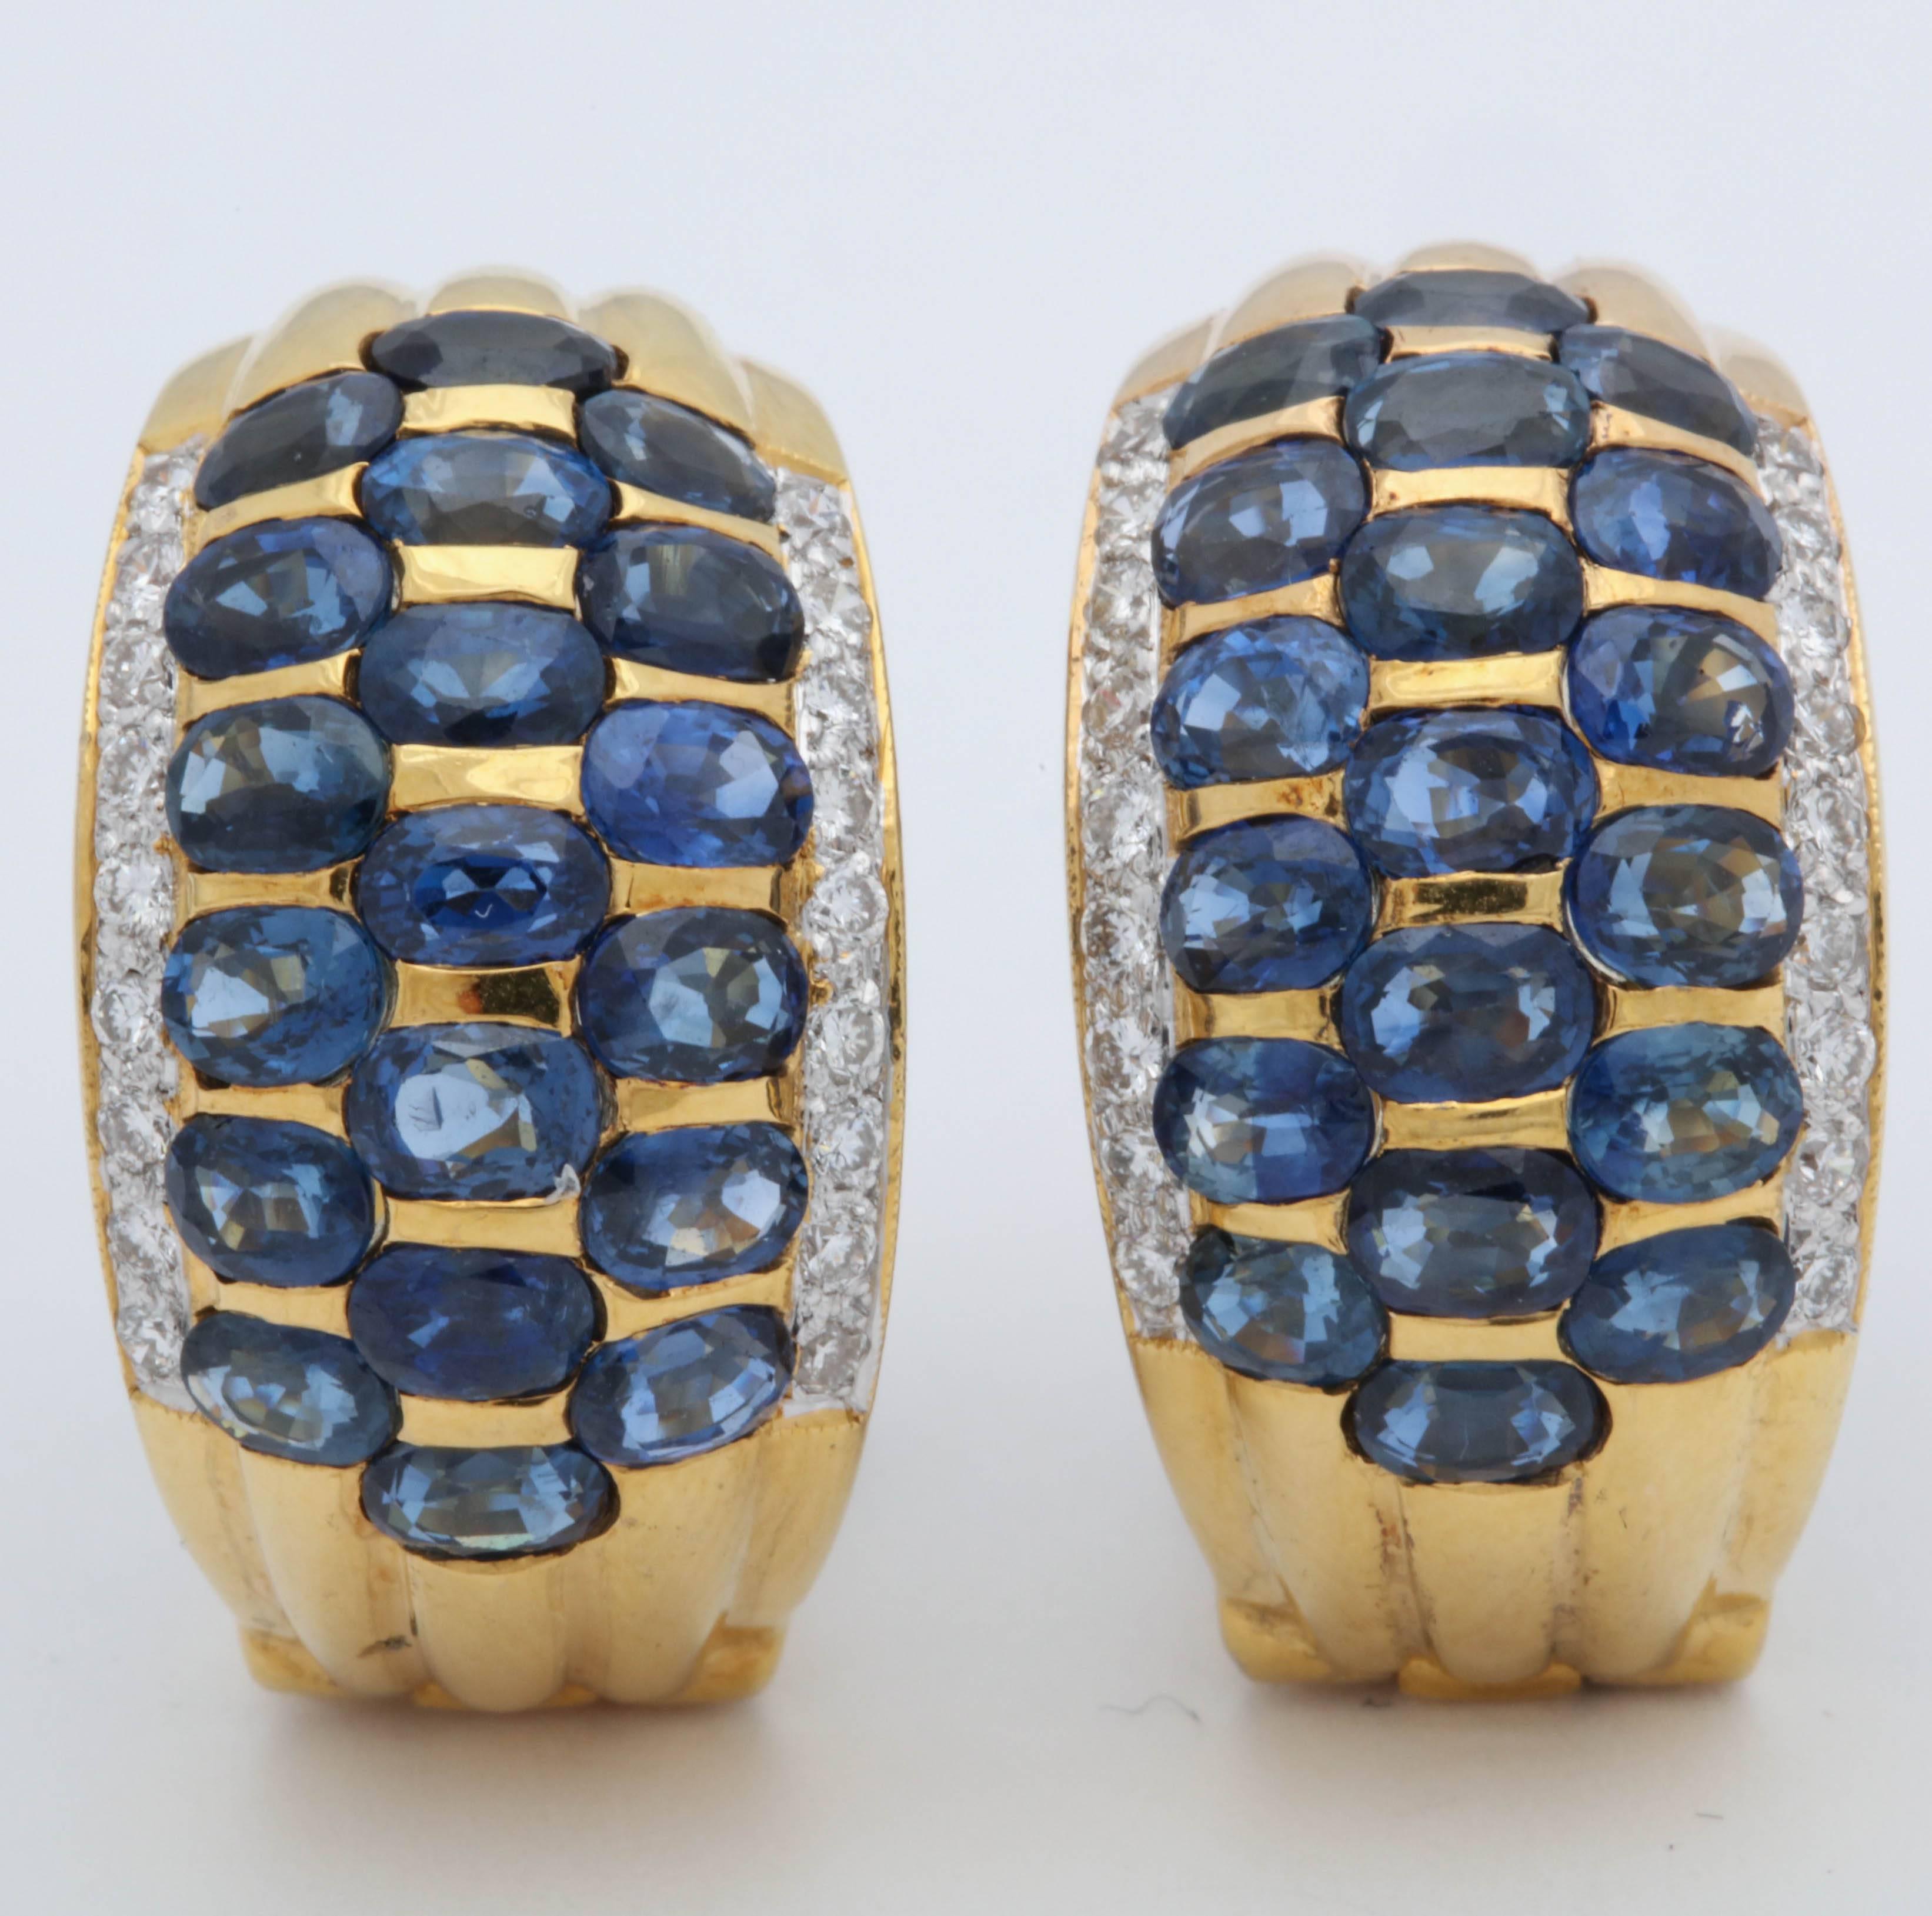 One Pair Of 18kt Yellow Gold Ladies Earclips With Posts Designed With Horizontal Invisible Set Sapphires Weighing Approximately Five Carats Total Weight Of Sapphires. Earclips Are Further Embellished With Four Rows Of High quality Full cut Diamonds